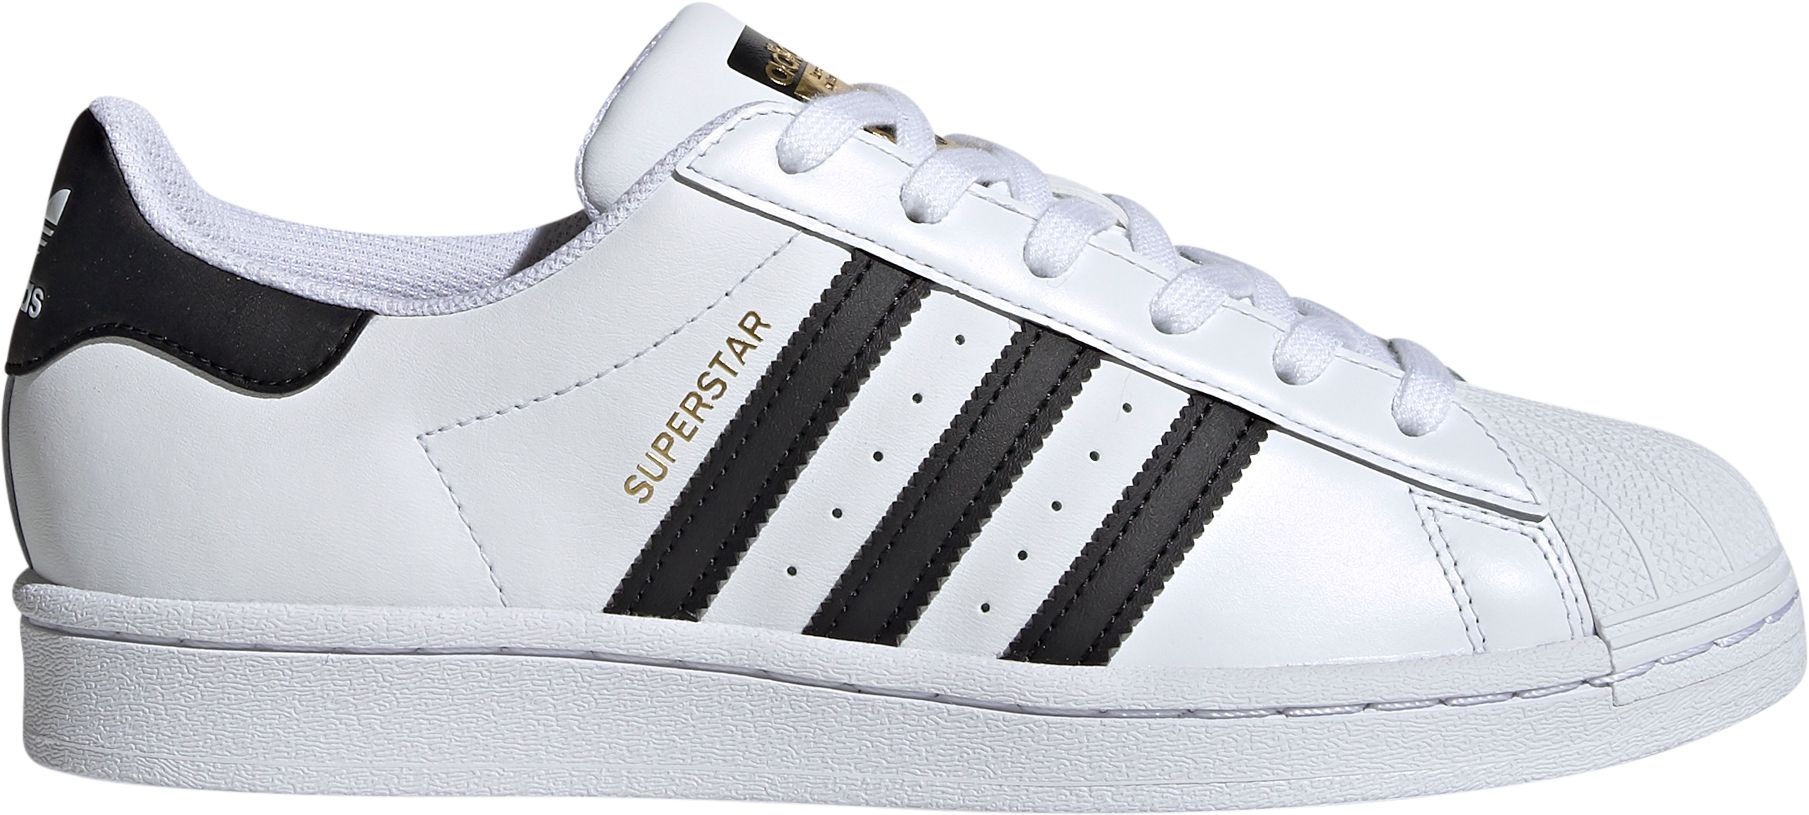 best place to buy adidas superstar